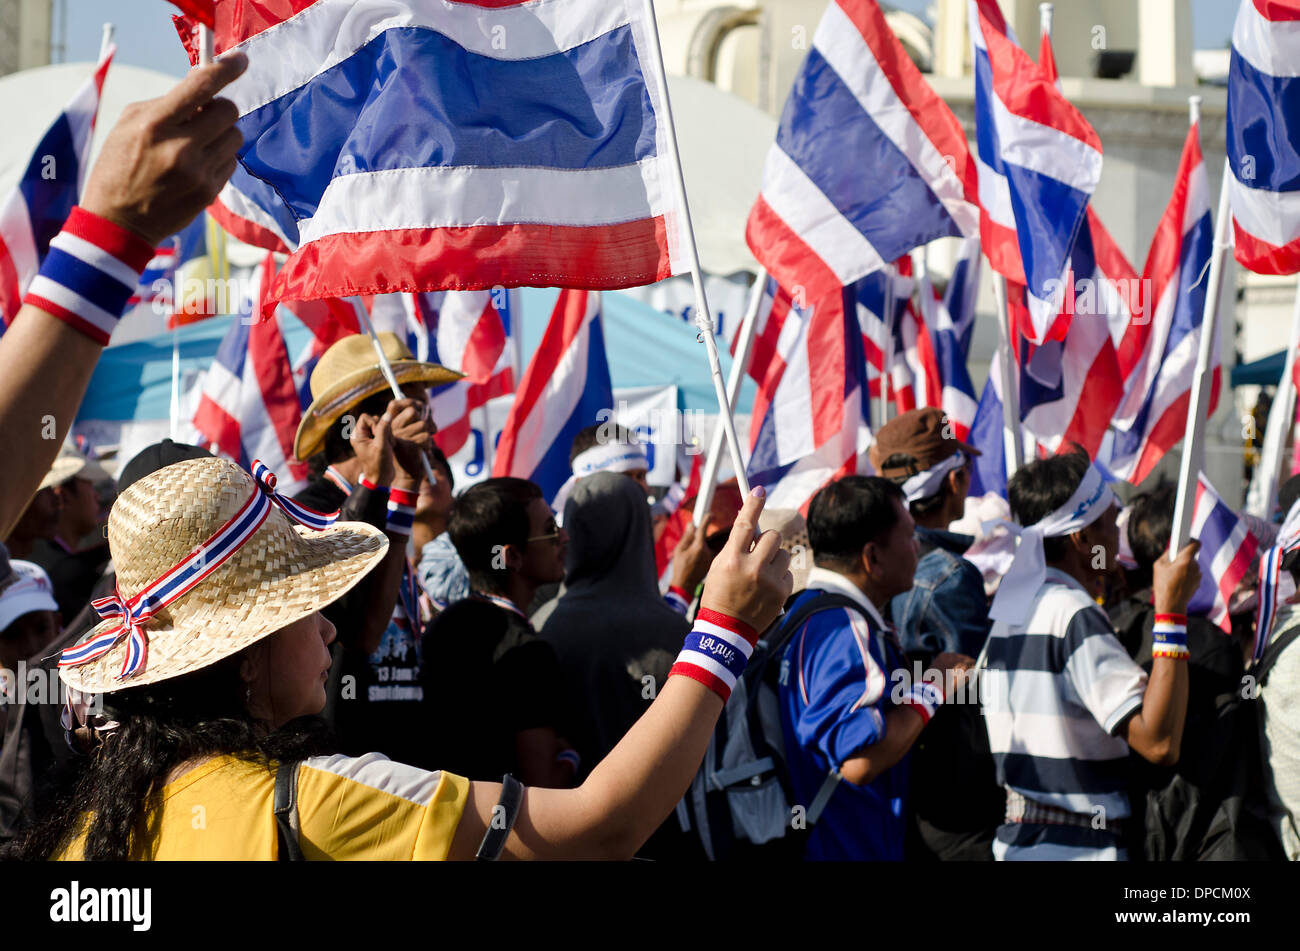 Bangkok, Thailand.12th January, 2014.Antigovernment protesters in front of Democracy Monument   during  the last day  ahead of the Bangkok shutdown on January 13. Stock Photo